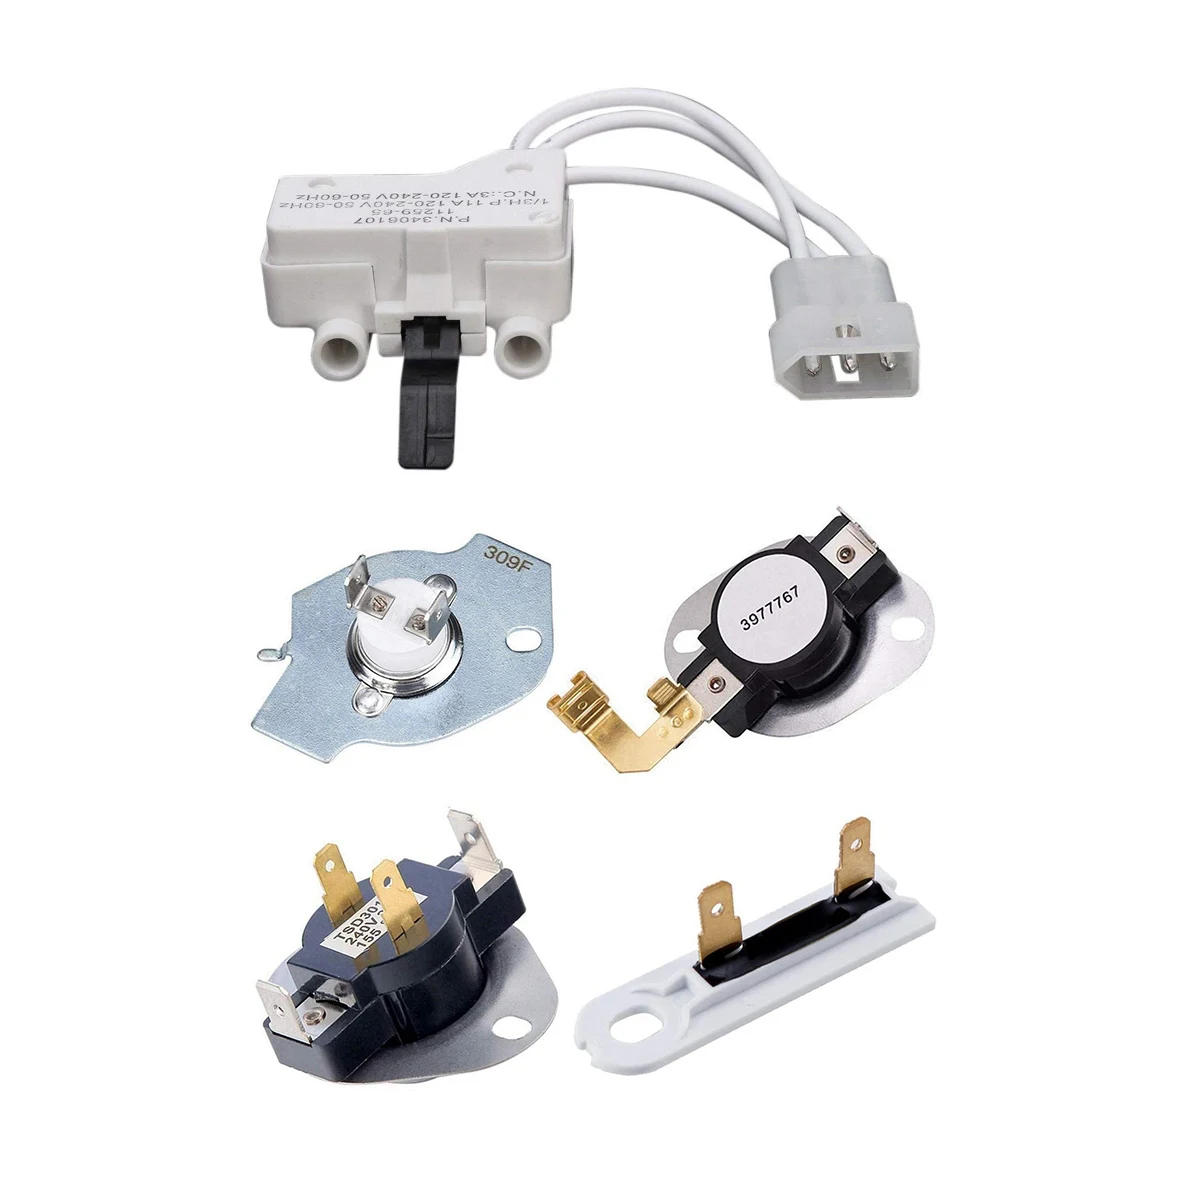 

Dryer Door Switch for 3406109 3406107 Whirlpool, Kenmore, Sears, Maytag, Roper, Estate & Dryer Replacement Kit 3387134 High-L